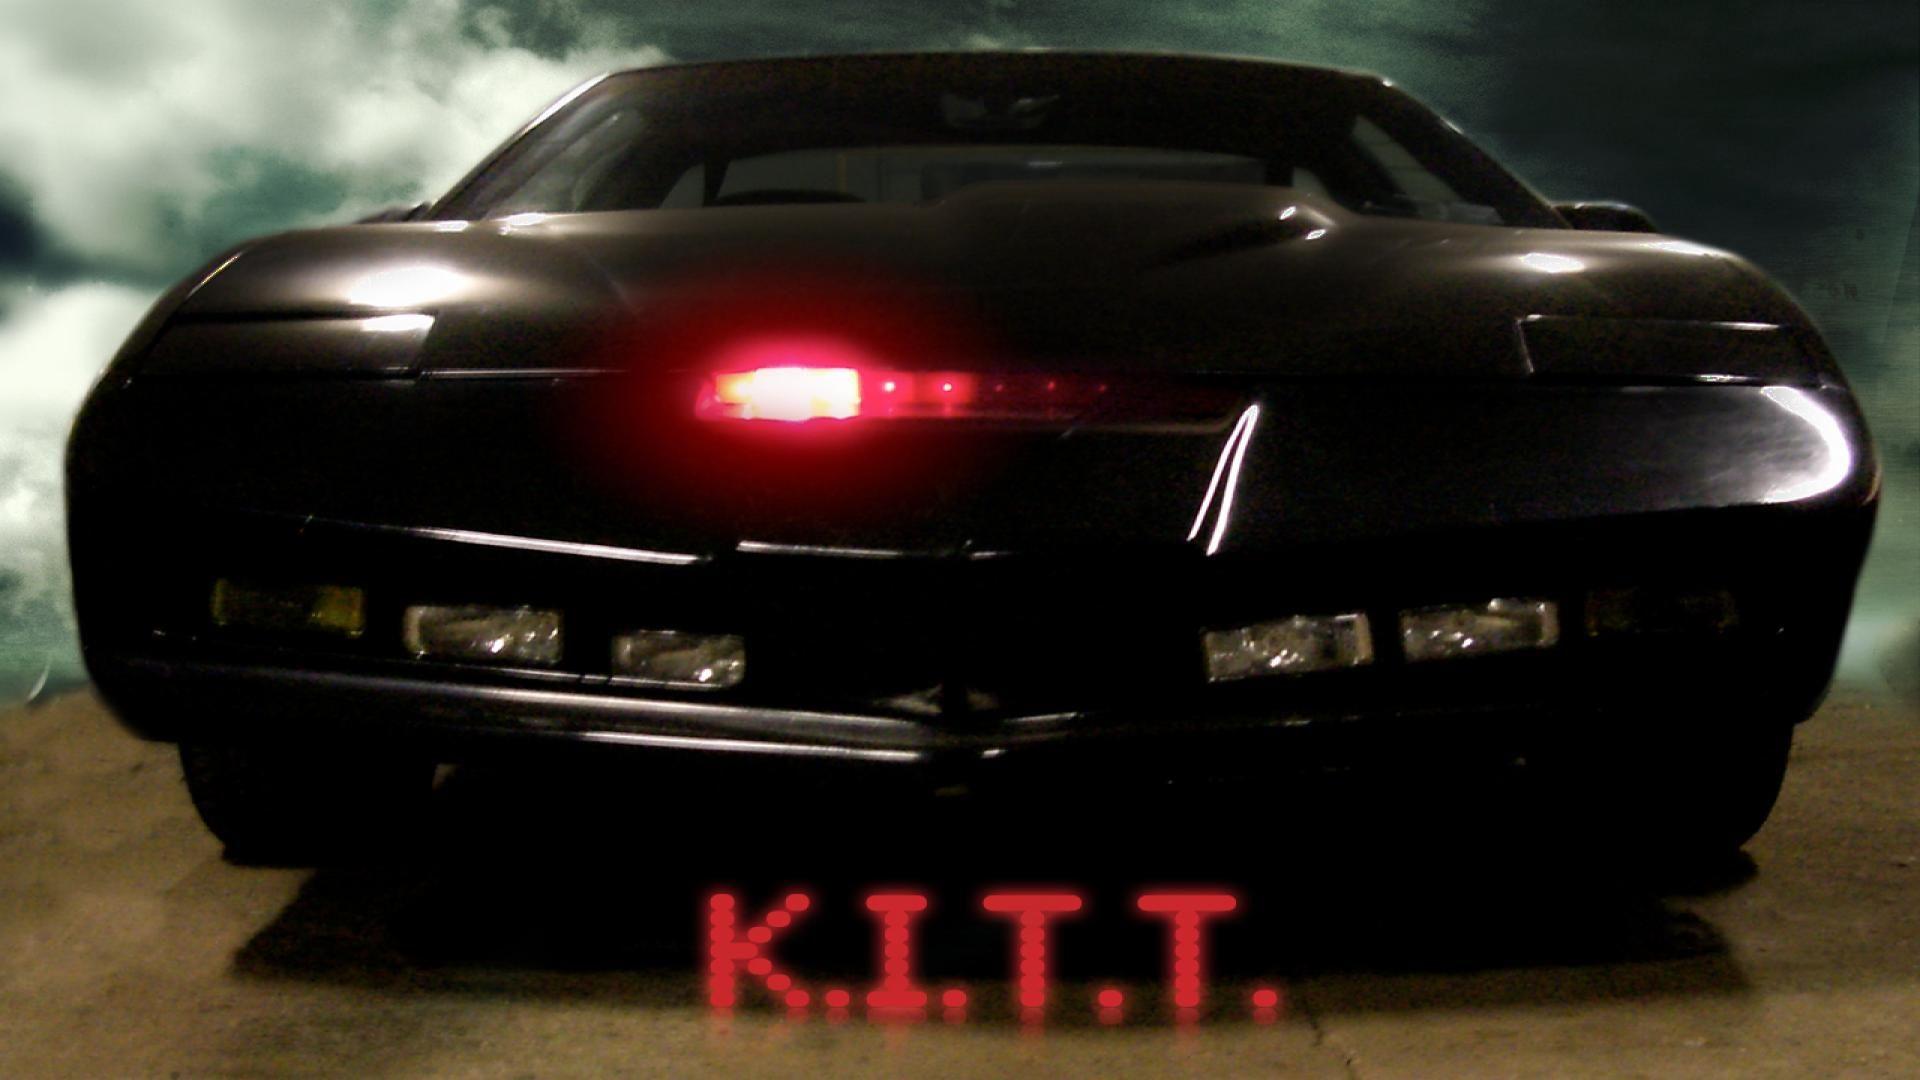 best Knight Rider Car HD Wallpaper image collection